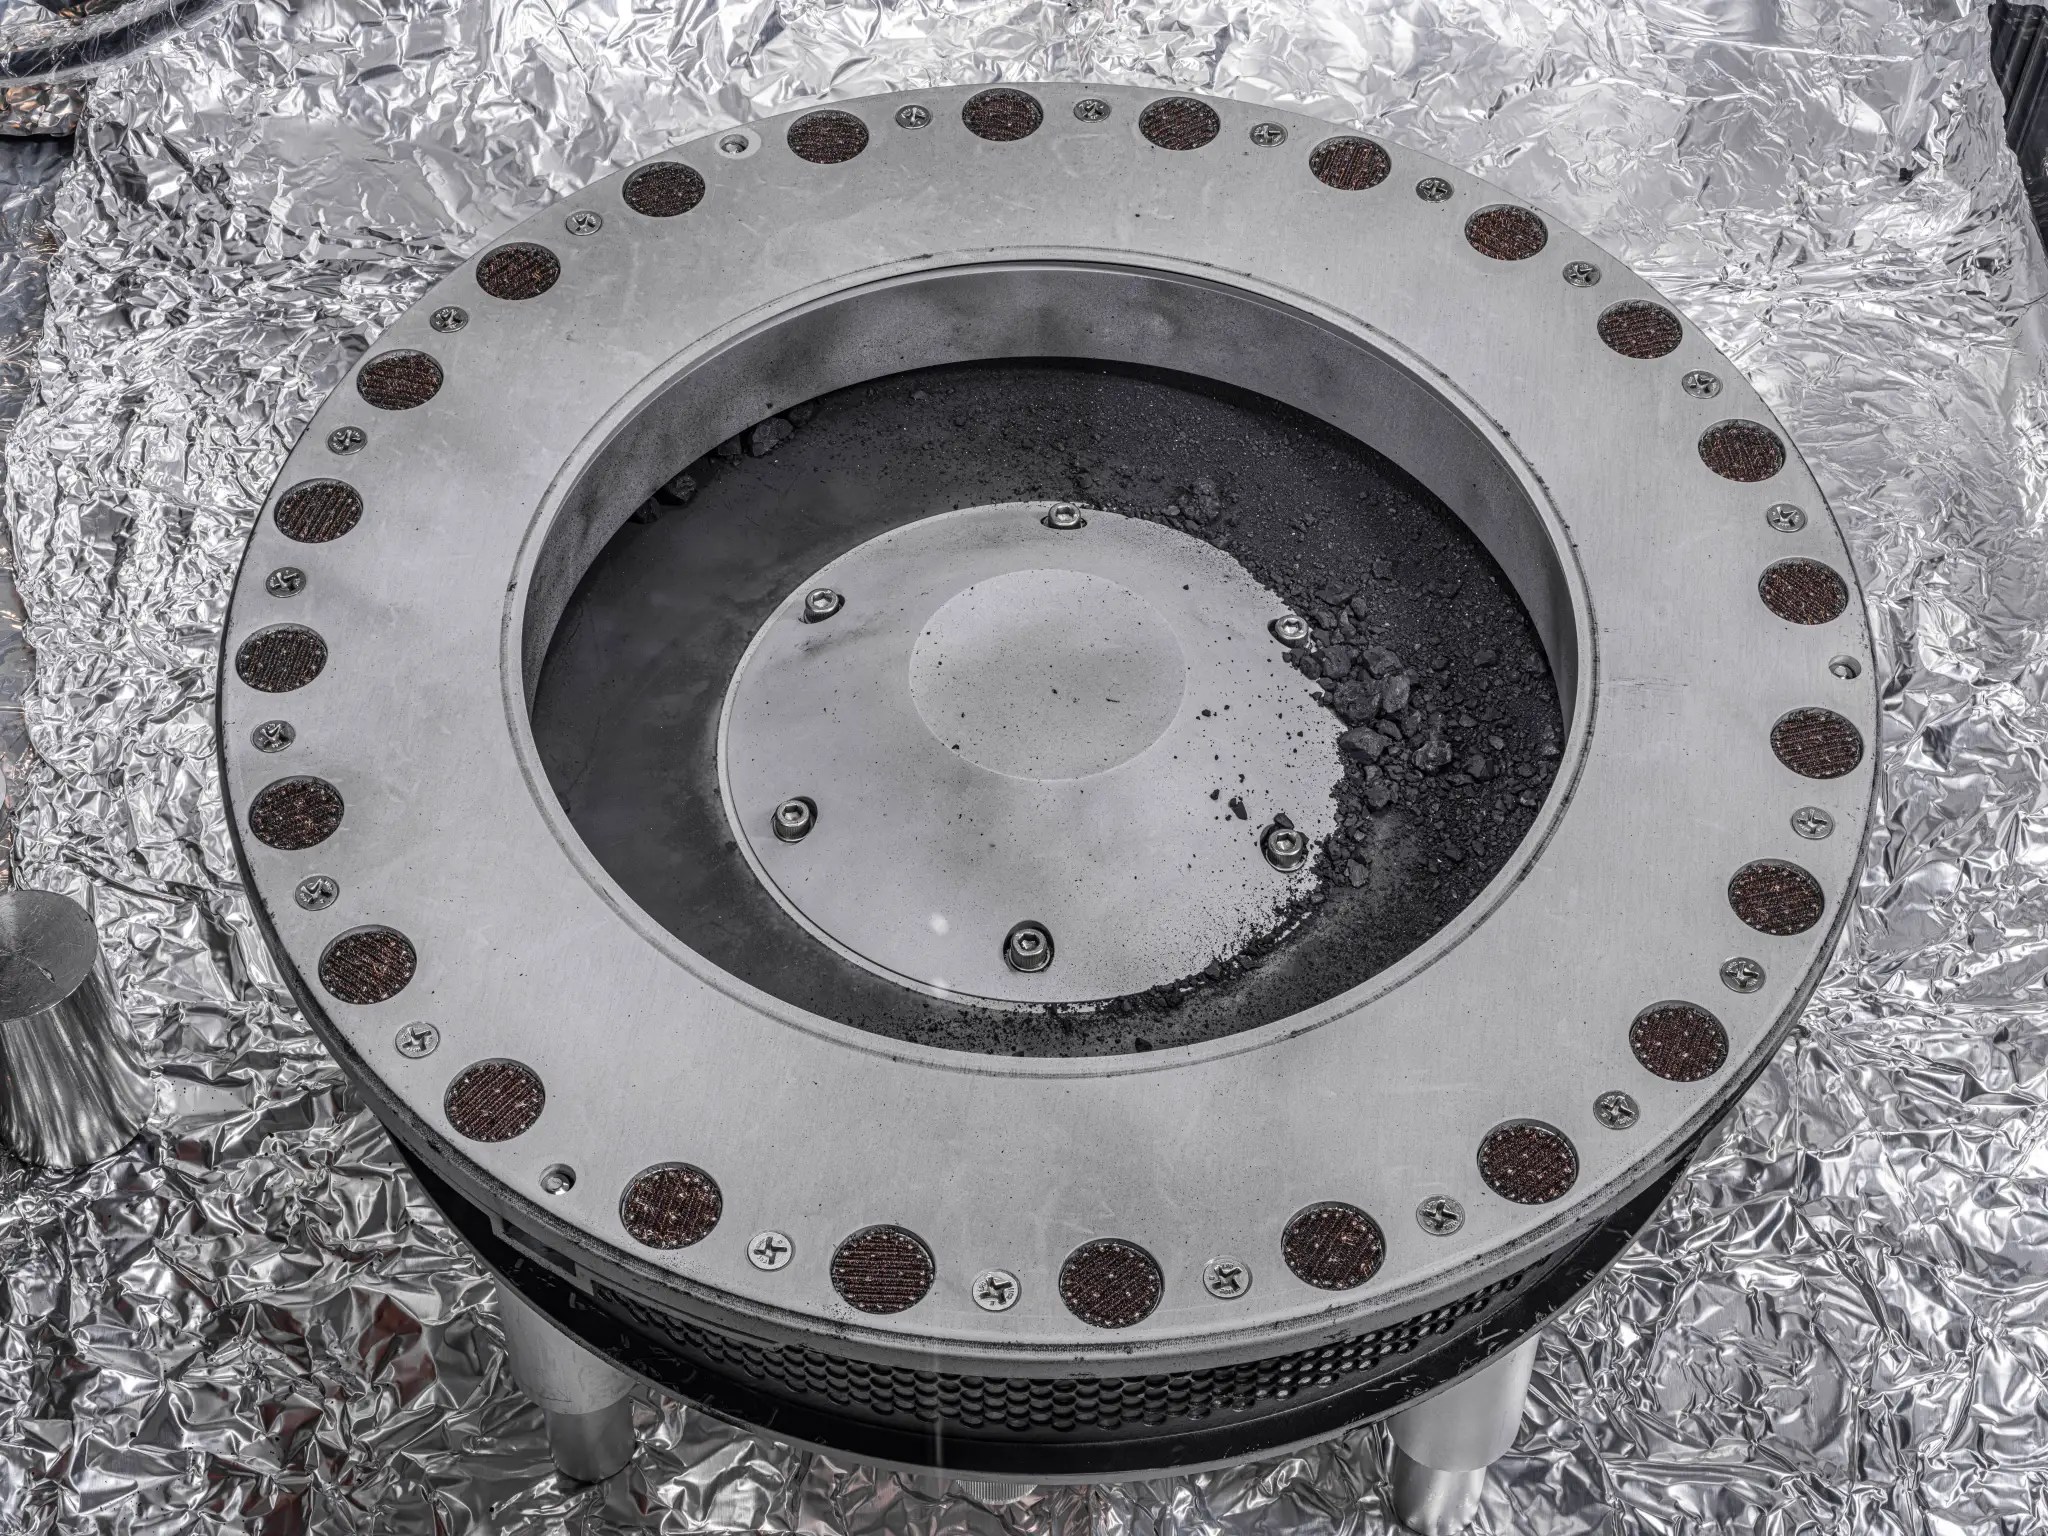 A view of the outside of the OSIRIS-REx sample collector. Dark sample material from asteroid Bennu can be seen on the middle right. Scientists have found evidence of both carbon and water in initial analysis of this material. The bulk of the sample is located inside. 